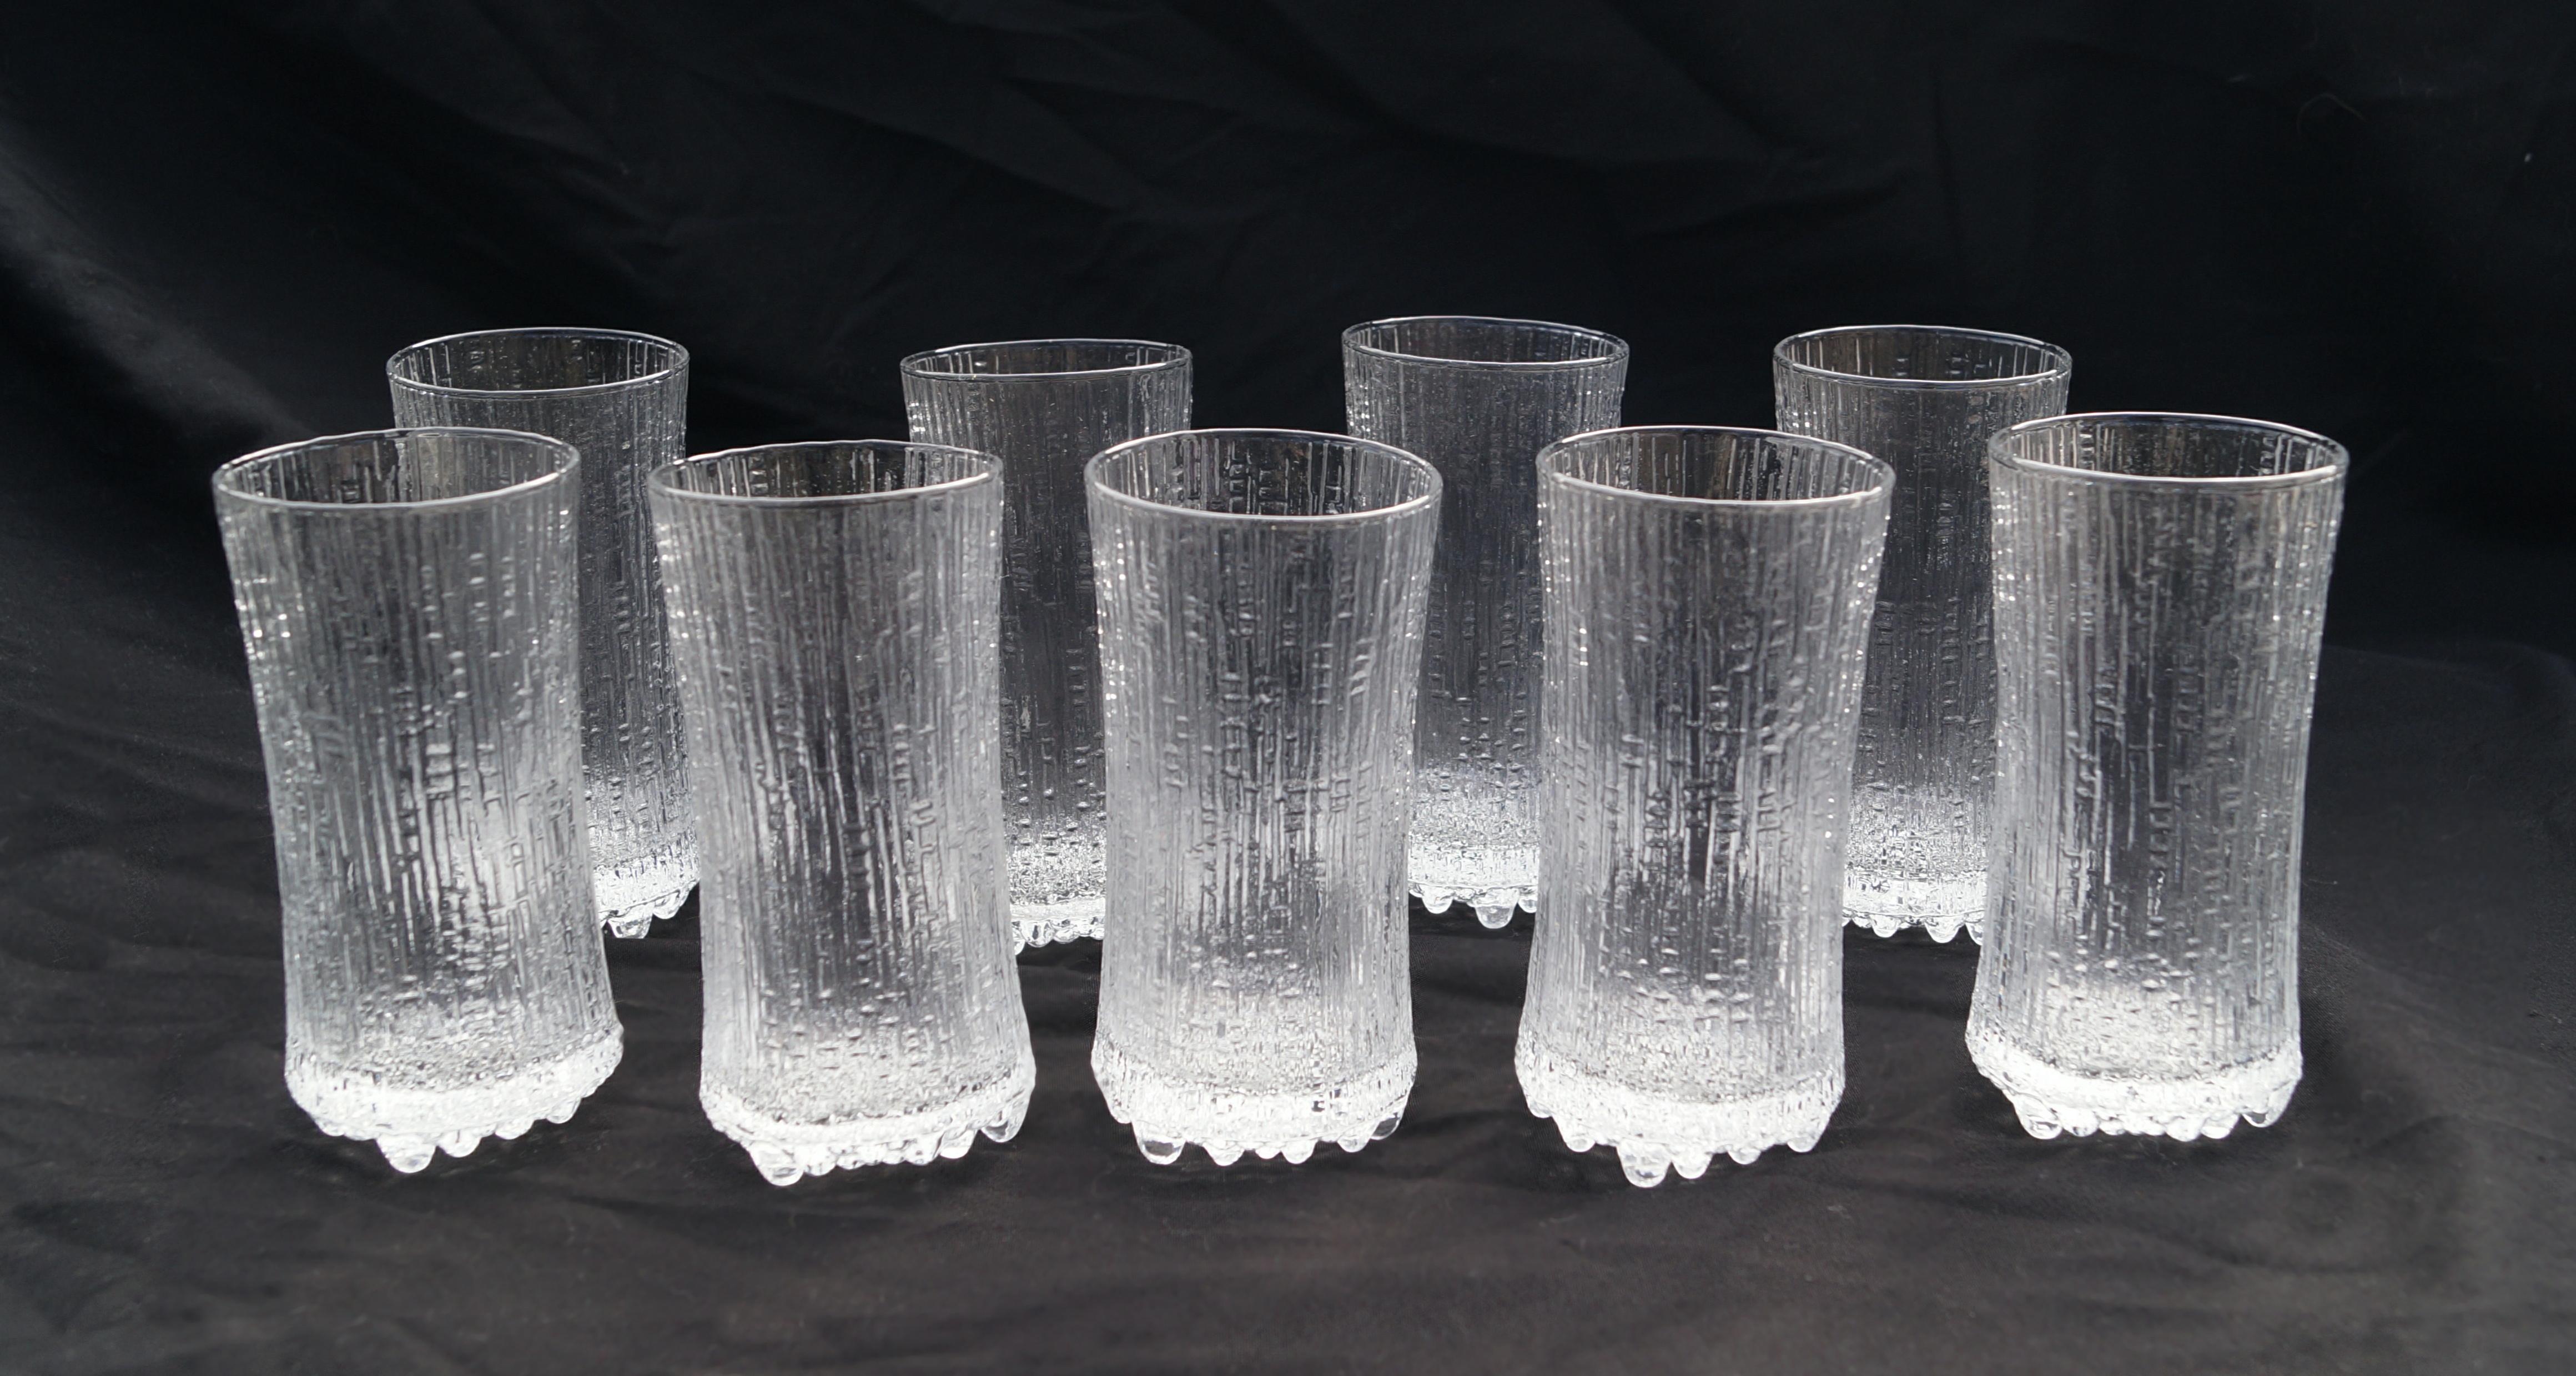 Set of 9 Vintage Mid-Century Modern Tapio Wirkkala Ultima Thule Glass Sparkling / Wine Champagne Glasses . The measurements are close to all on a replacement website, so not certain which they are. Made in Finland .  The lip is approx 1.25